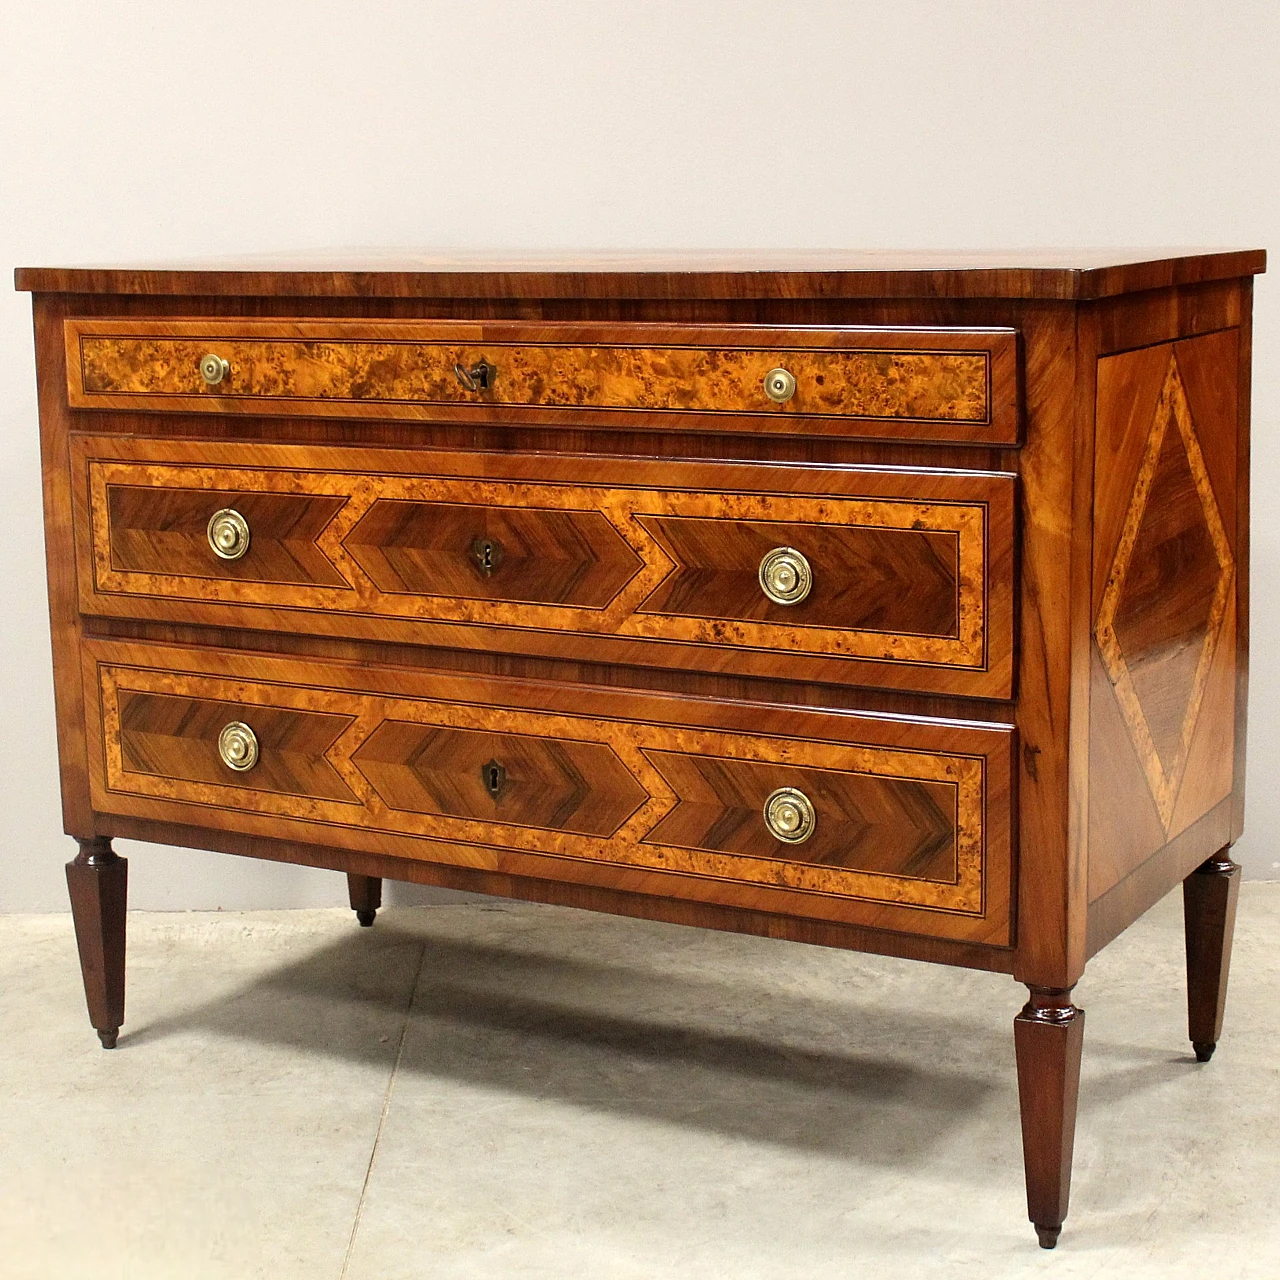 Emilian Louis XVI walnut and cherry commode with inlays, 18th century 12